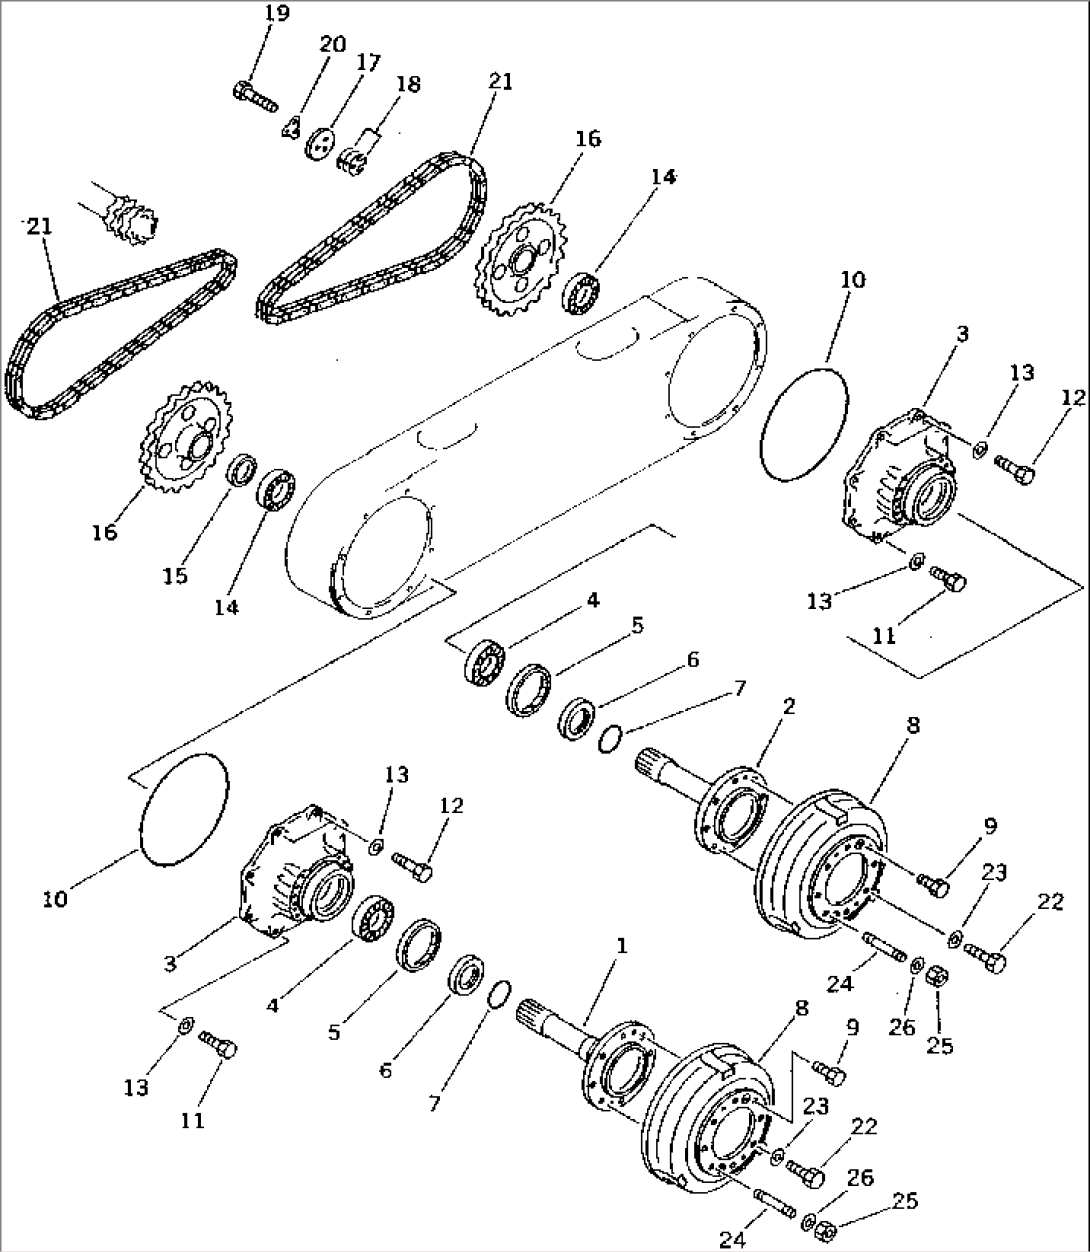 TANDEM DRIVE GEAR AND CHAIN(#1415-)